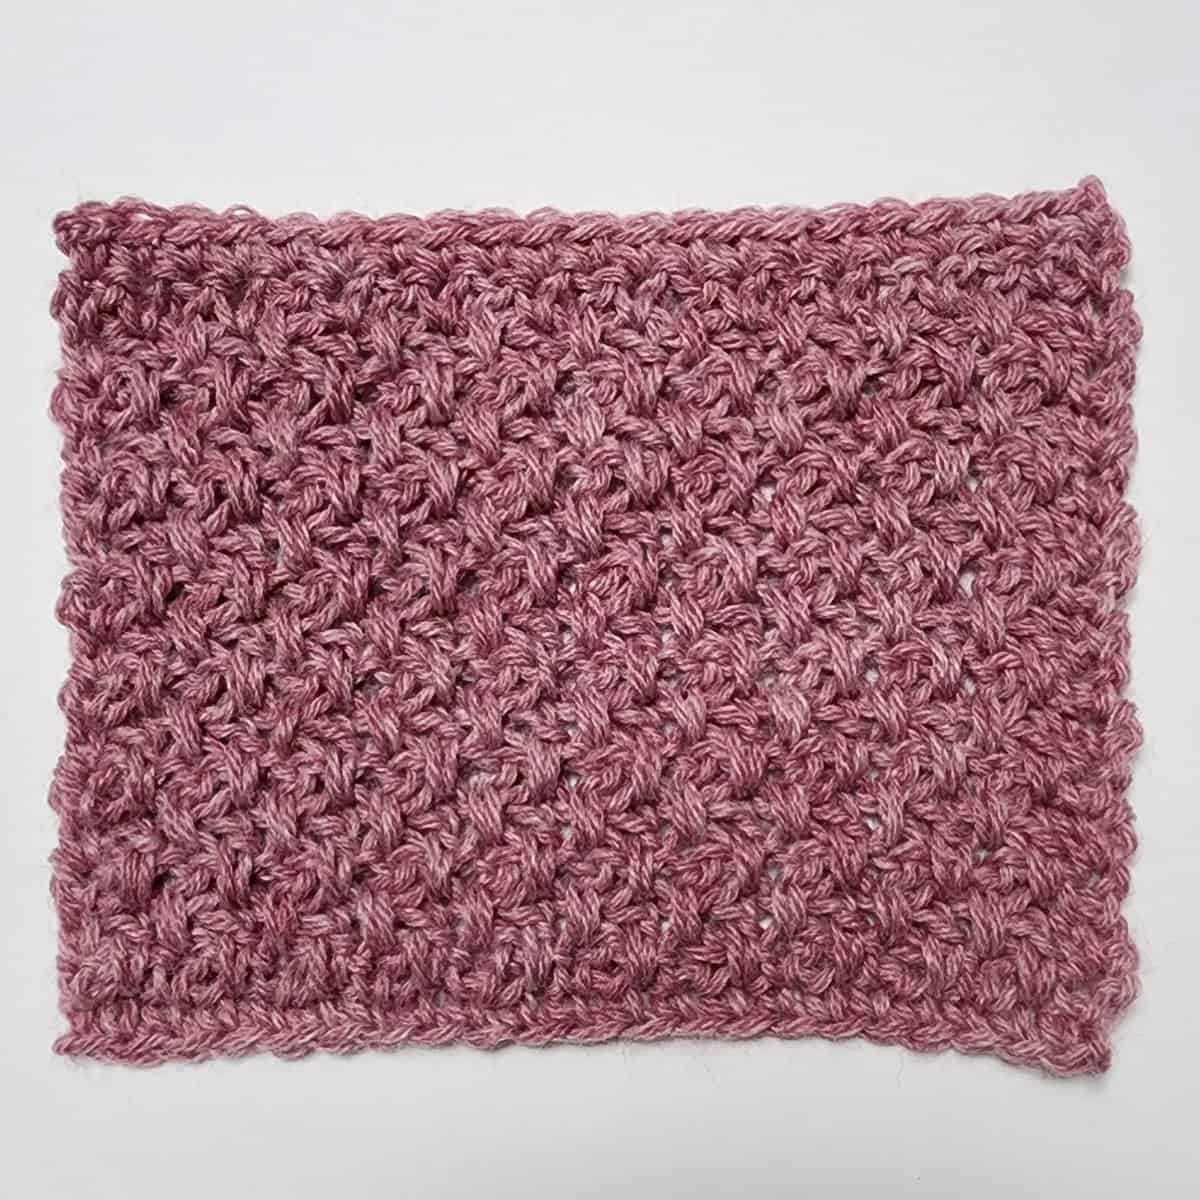 How to Crochet the Extended Moss Stitch - A Crocheted Simplicity